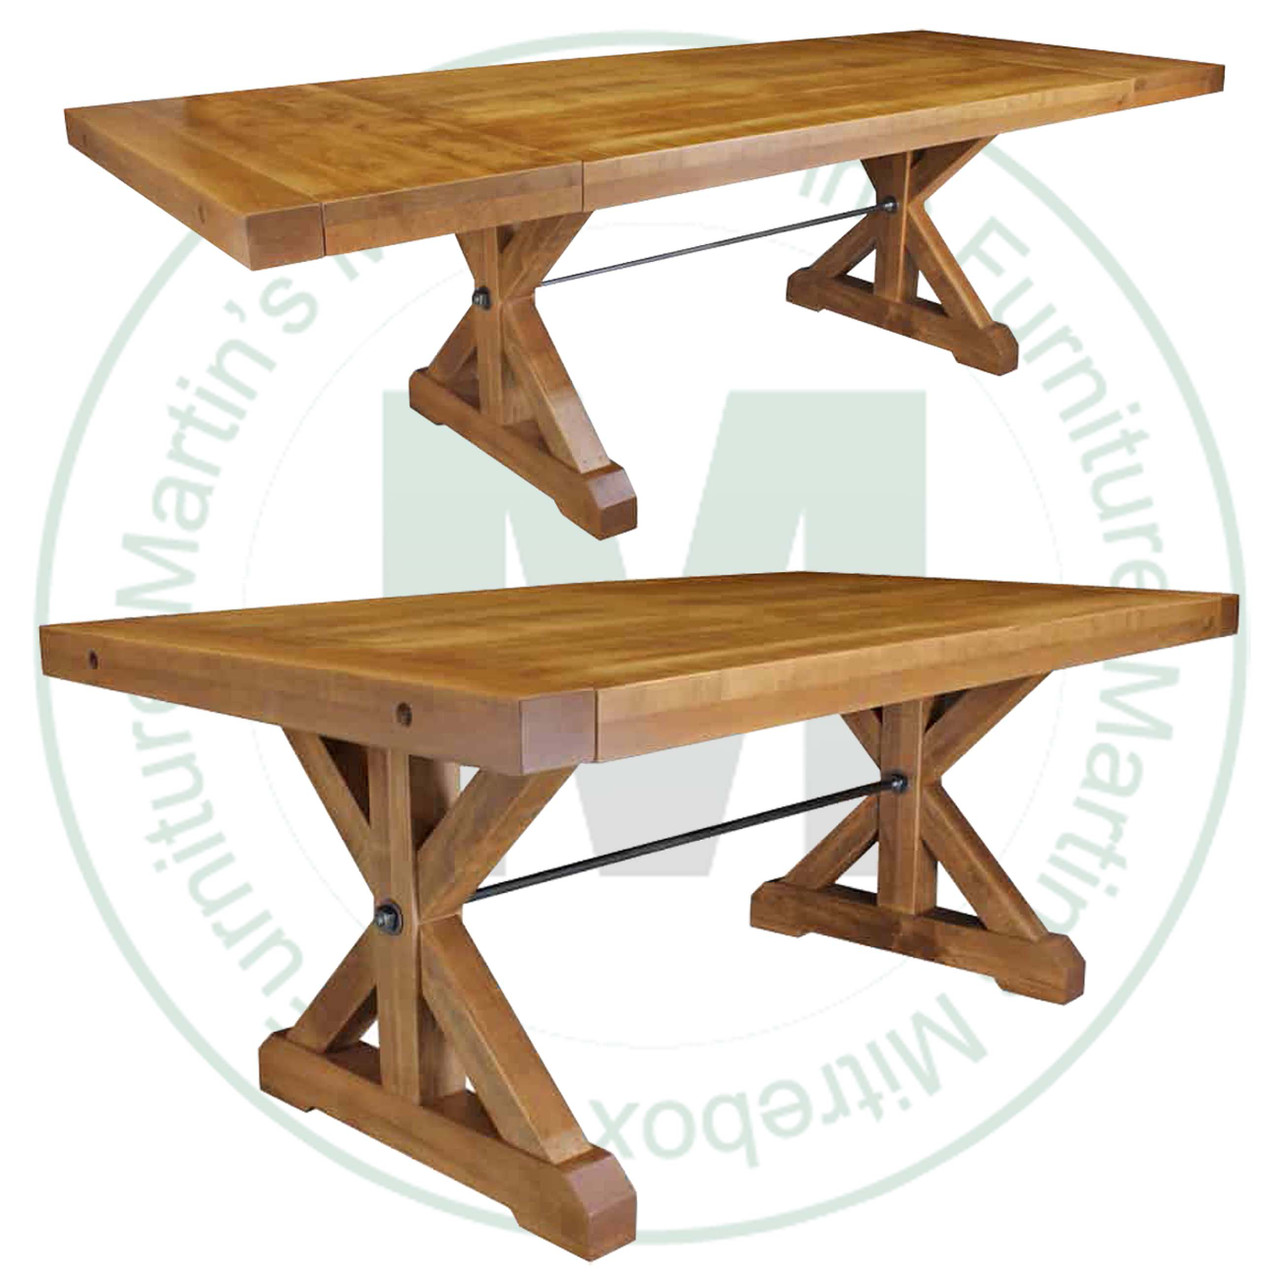 Maple Klondike Trestle Solid Top Table 42'' Deep x 84'' Wide x 30'' High With 2 - 16'' Leaves